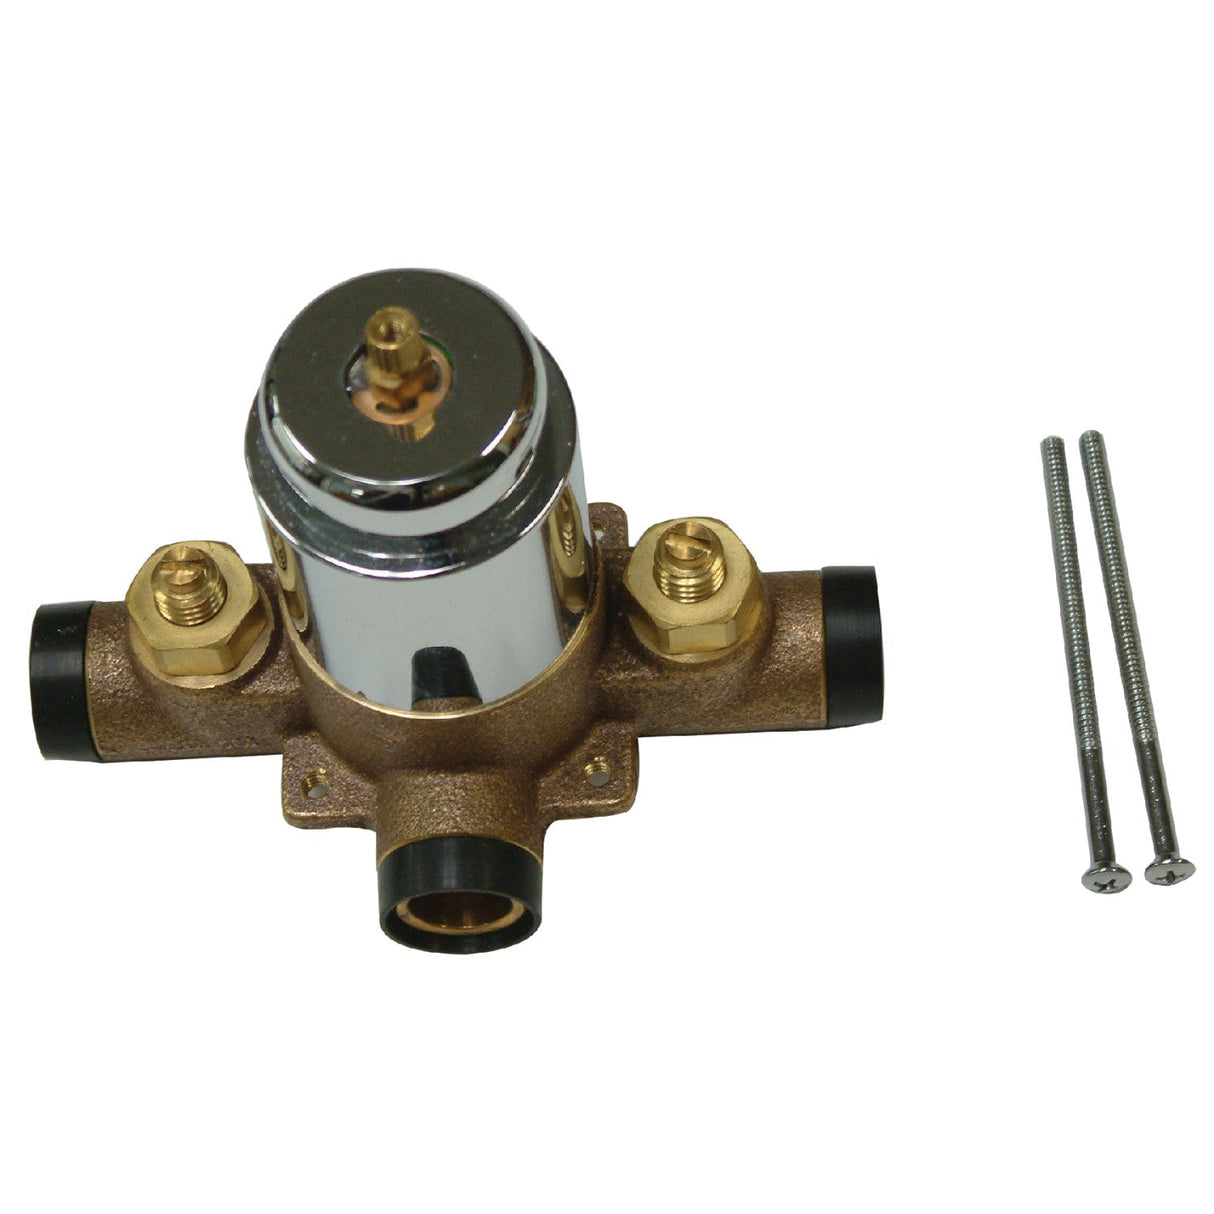 Plumbing Parts KB3631SWTV Pressure Balanced Tub and Shower Valve, CxC Swept, with Stops, Polished Chrome